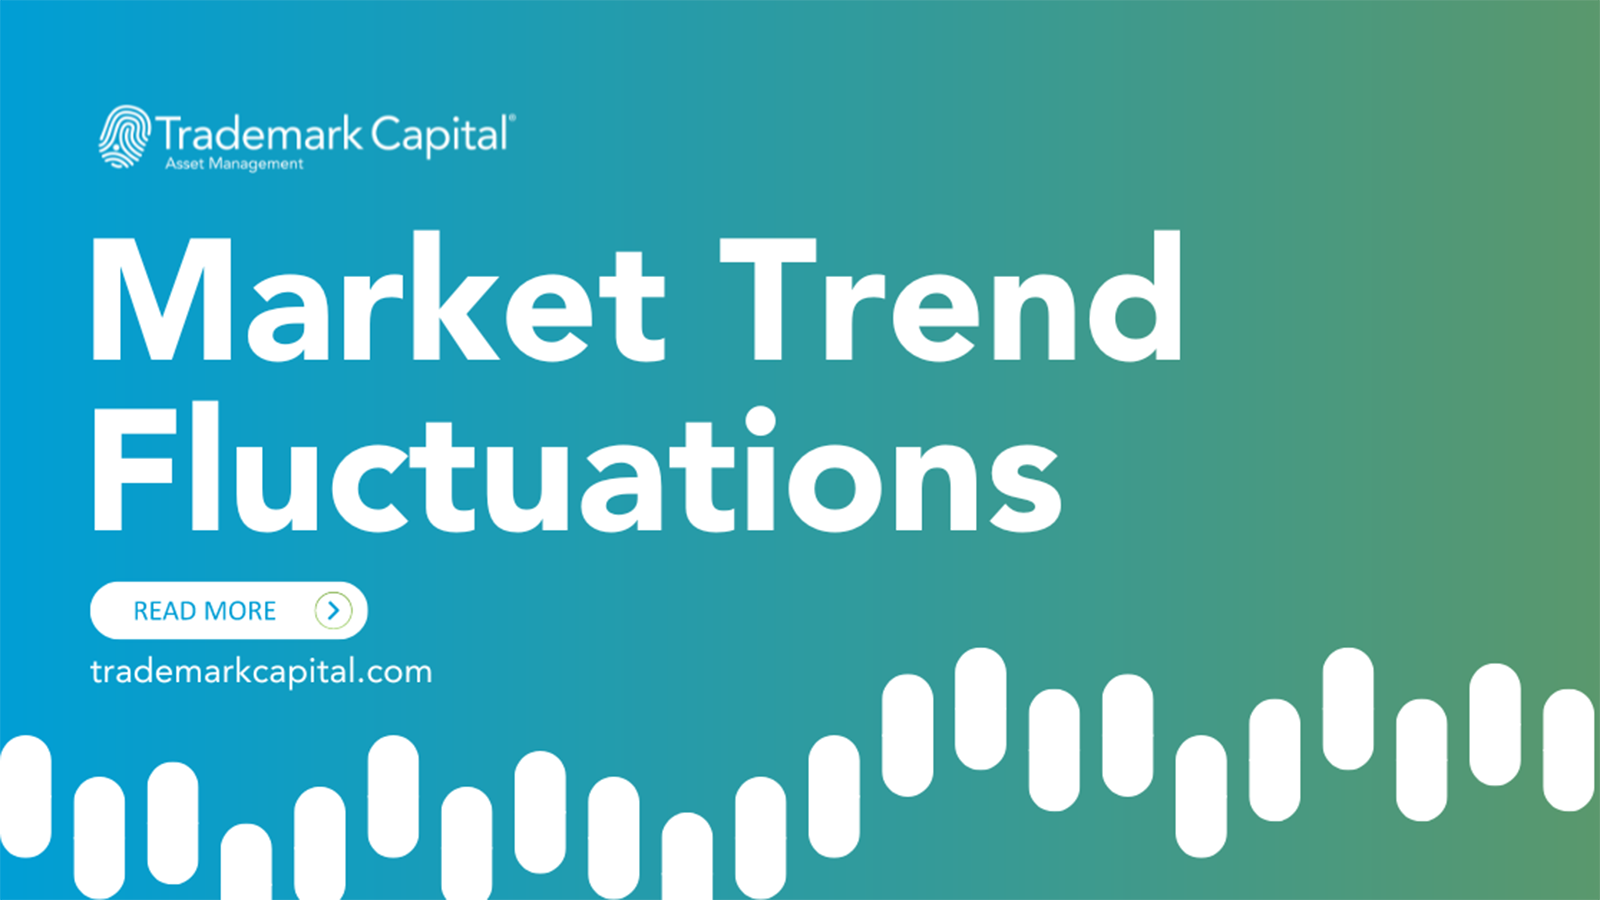 Why Do Market Trends Fluctuate?